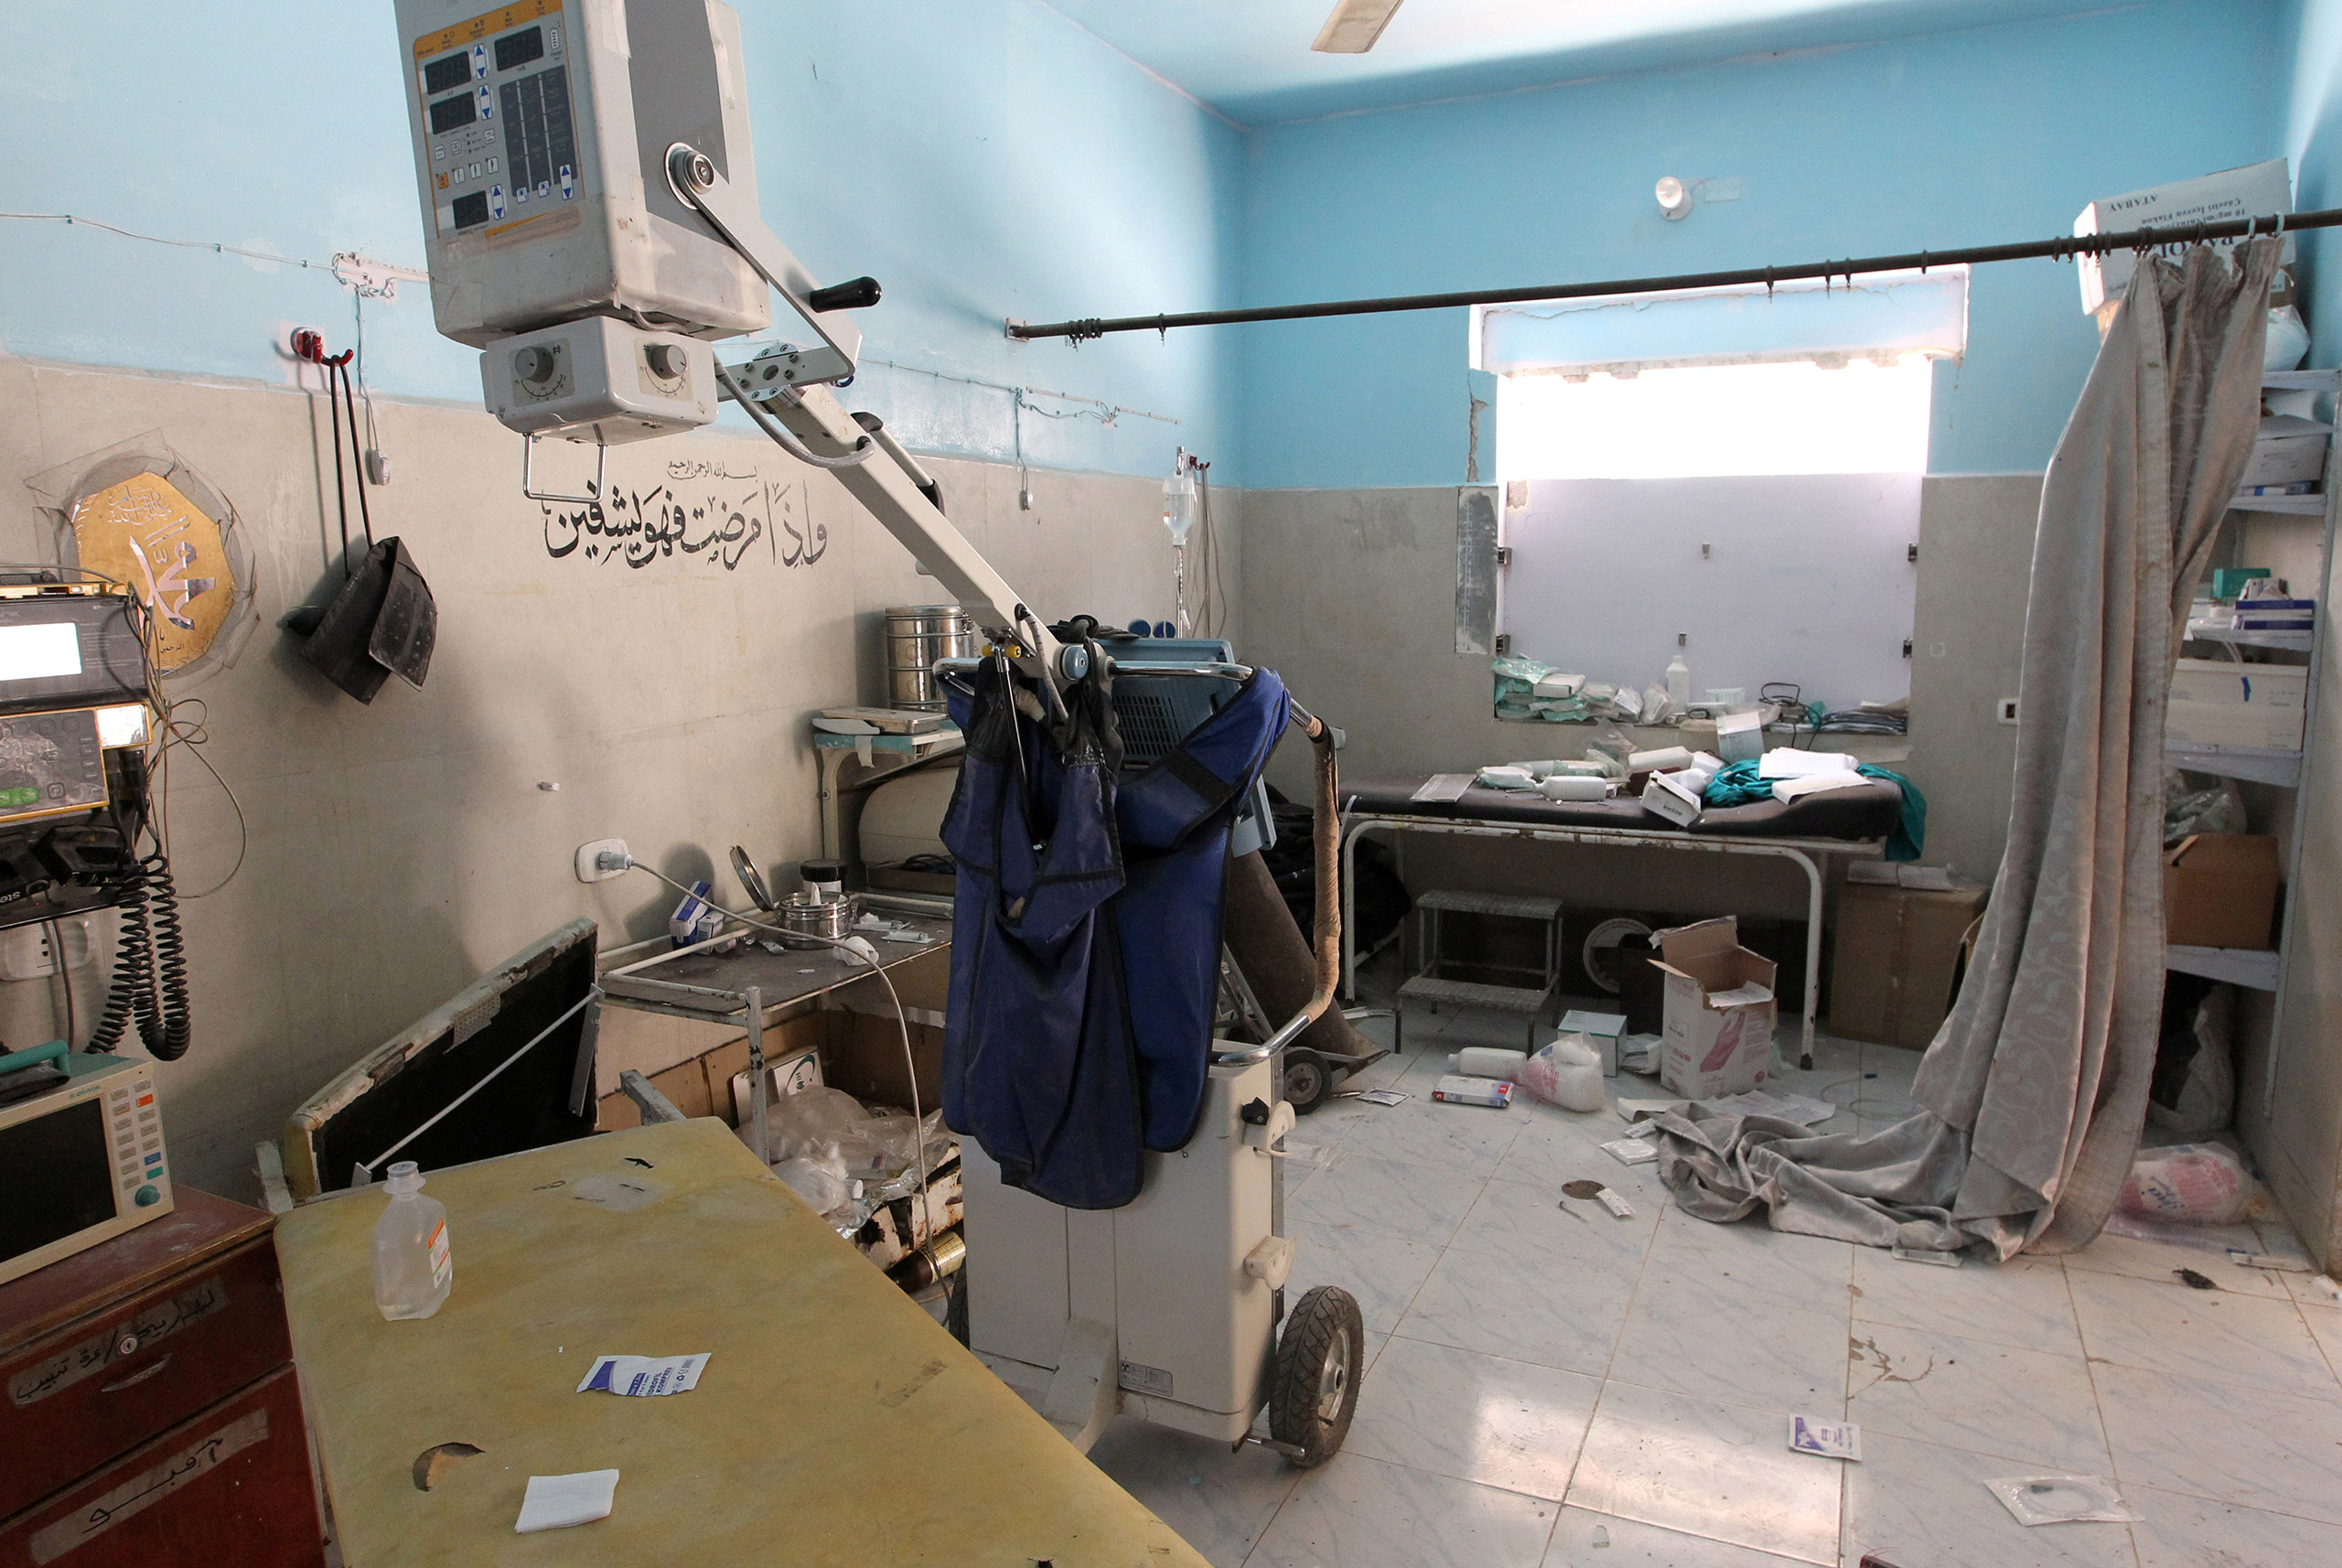 A video screengrab shows the damage inside Anadan Hospital, sponsored by Union of Medical Care and Relief Organizations (UOSSM), after it was hit by an airstrike in the rebel held city of Anadan, northern Aleppo province, Syria, on July 31, 2016. (Ammar Abdullah—Reuters)